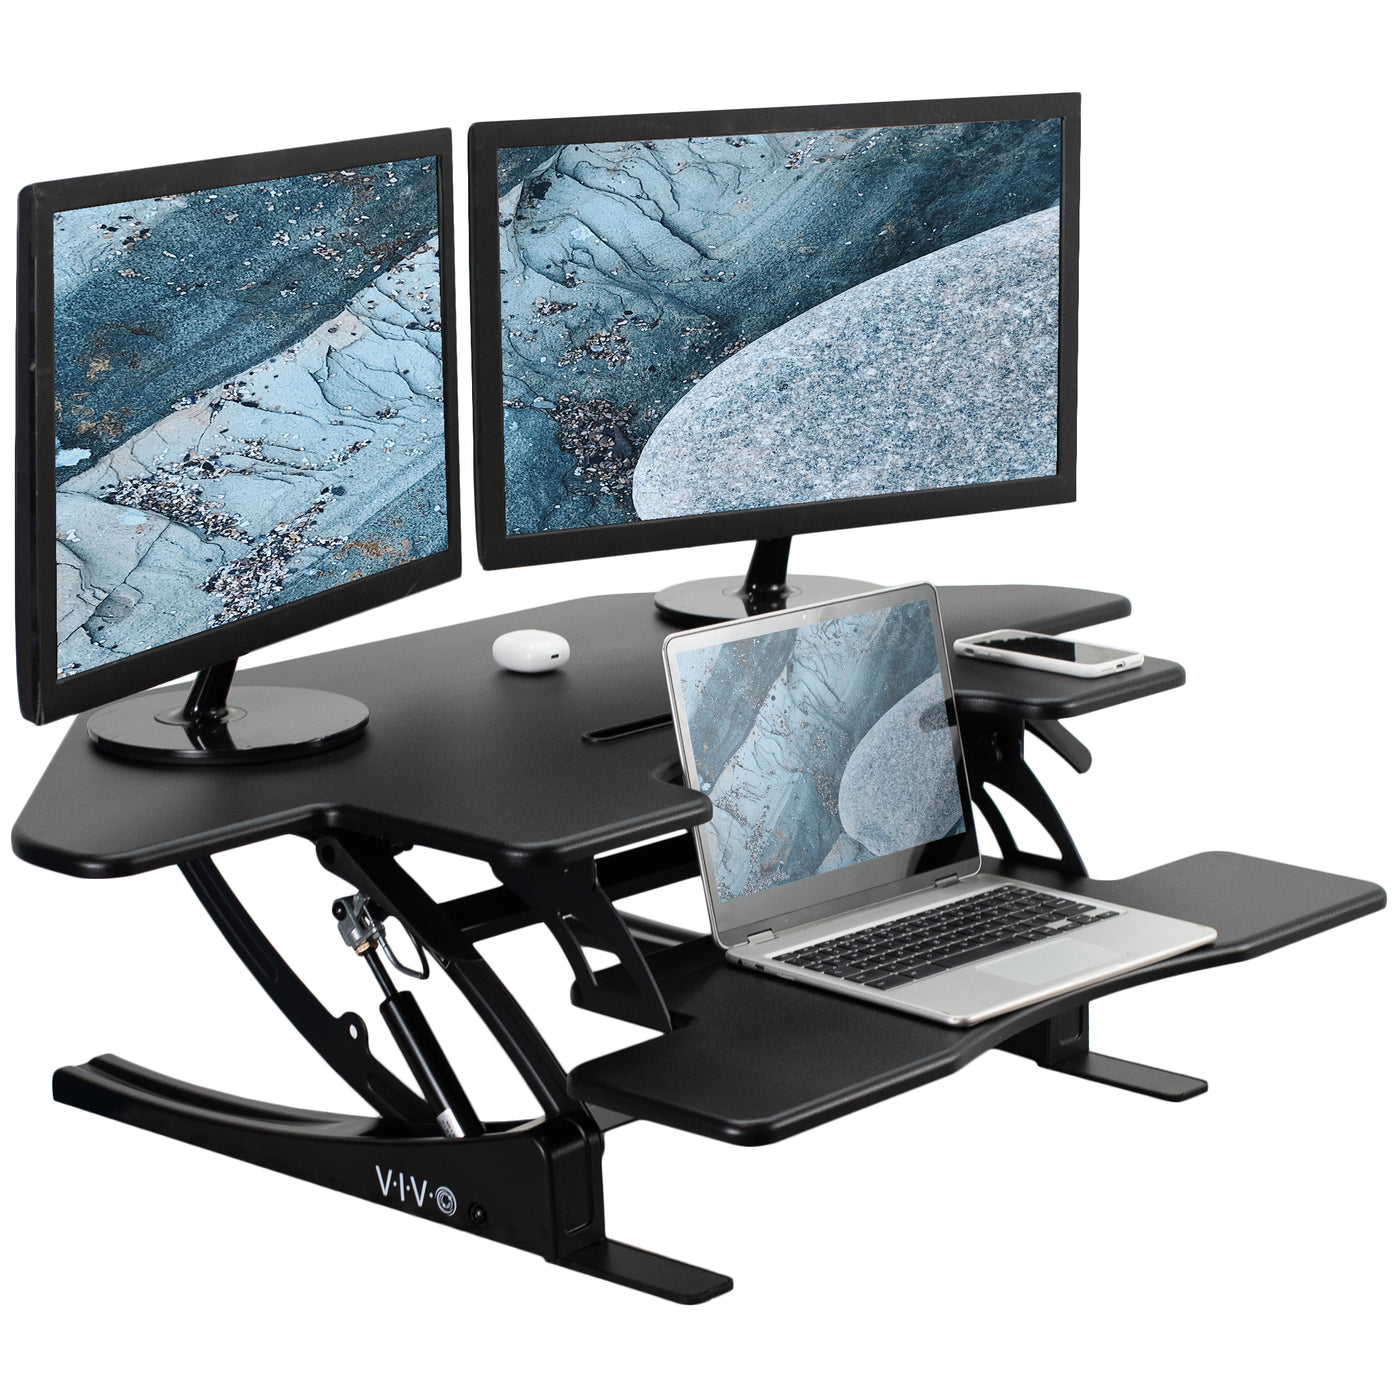  Two-tier tabletop desk riser with two monitors and a laptop.